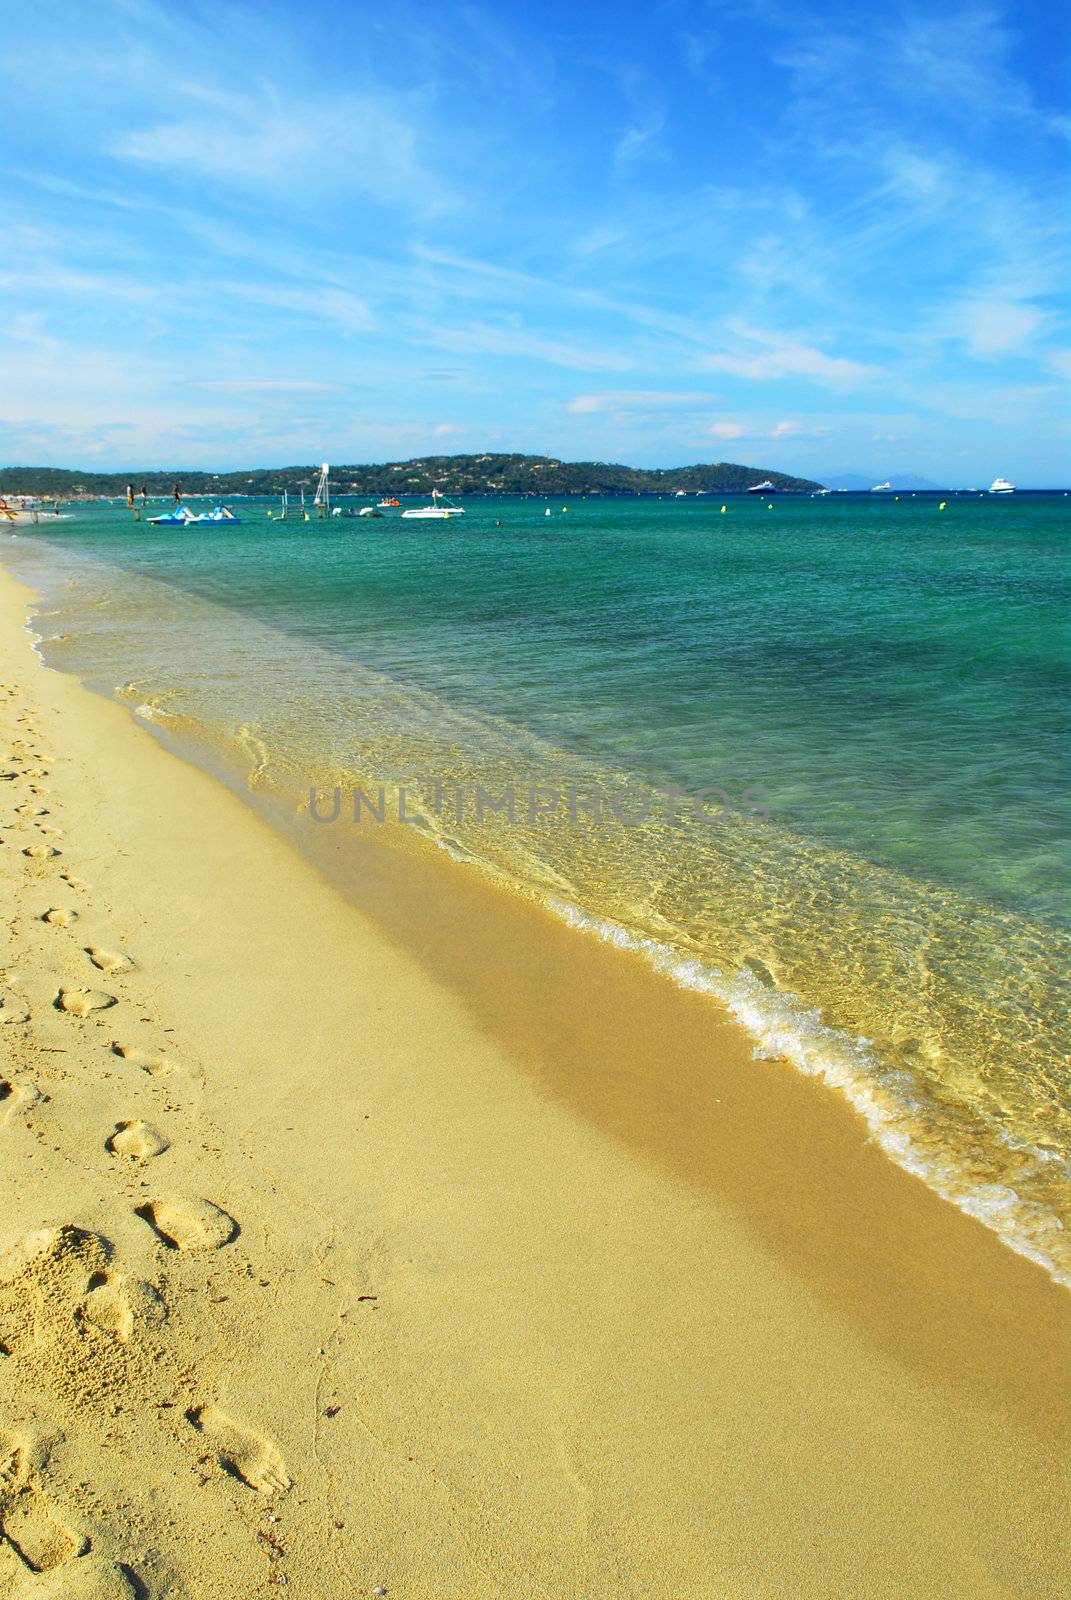 Footprints on the golden sand of famous Pampelonne beach near St. Tropez in French Riviera